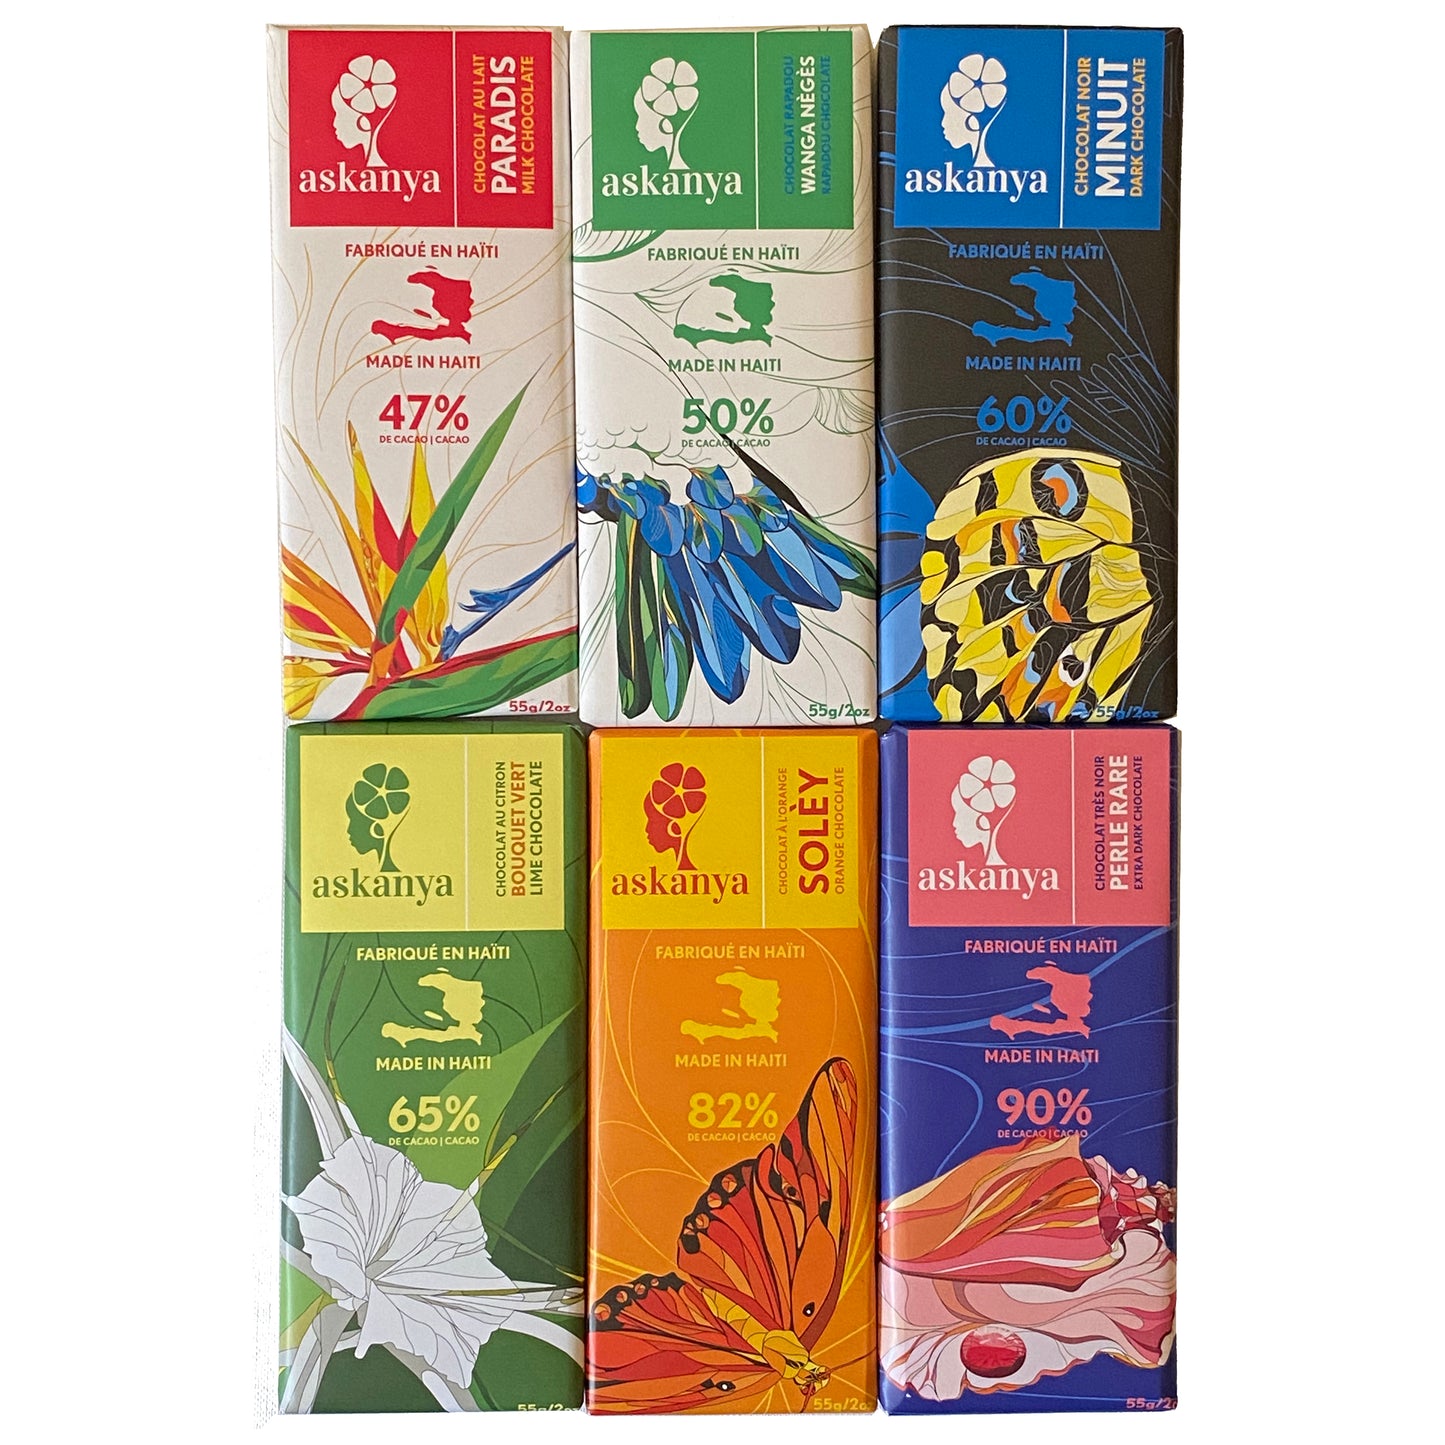 Black  packaging with yellow, orange, black and blue butterfly's wing (Haitian butterfly). Sticker with company logo (Askanya) and chocolate flavor information - Dark Chocolate  called "Minuit". Packaging also shows Haiti country map and cacao percentage of chocolate bar: 60%. Chocolate bar is 55g or 2oz.